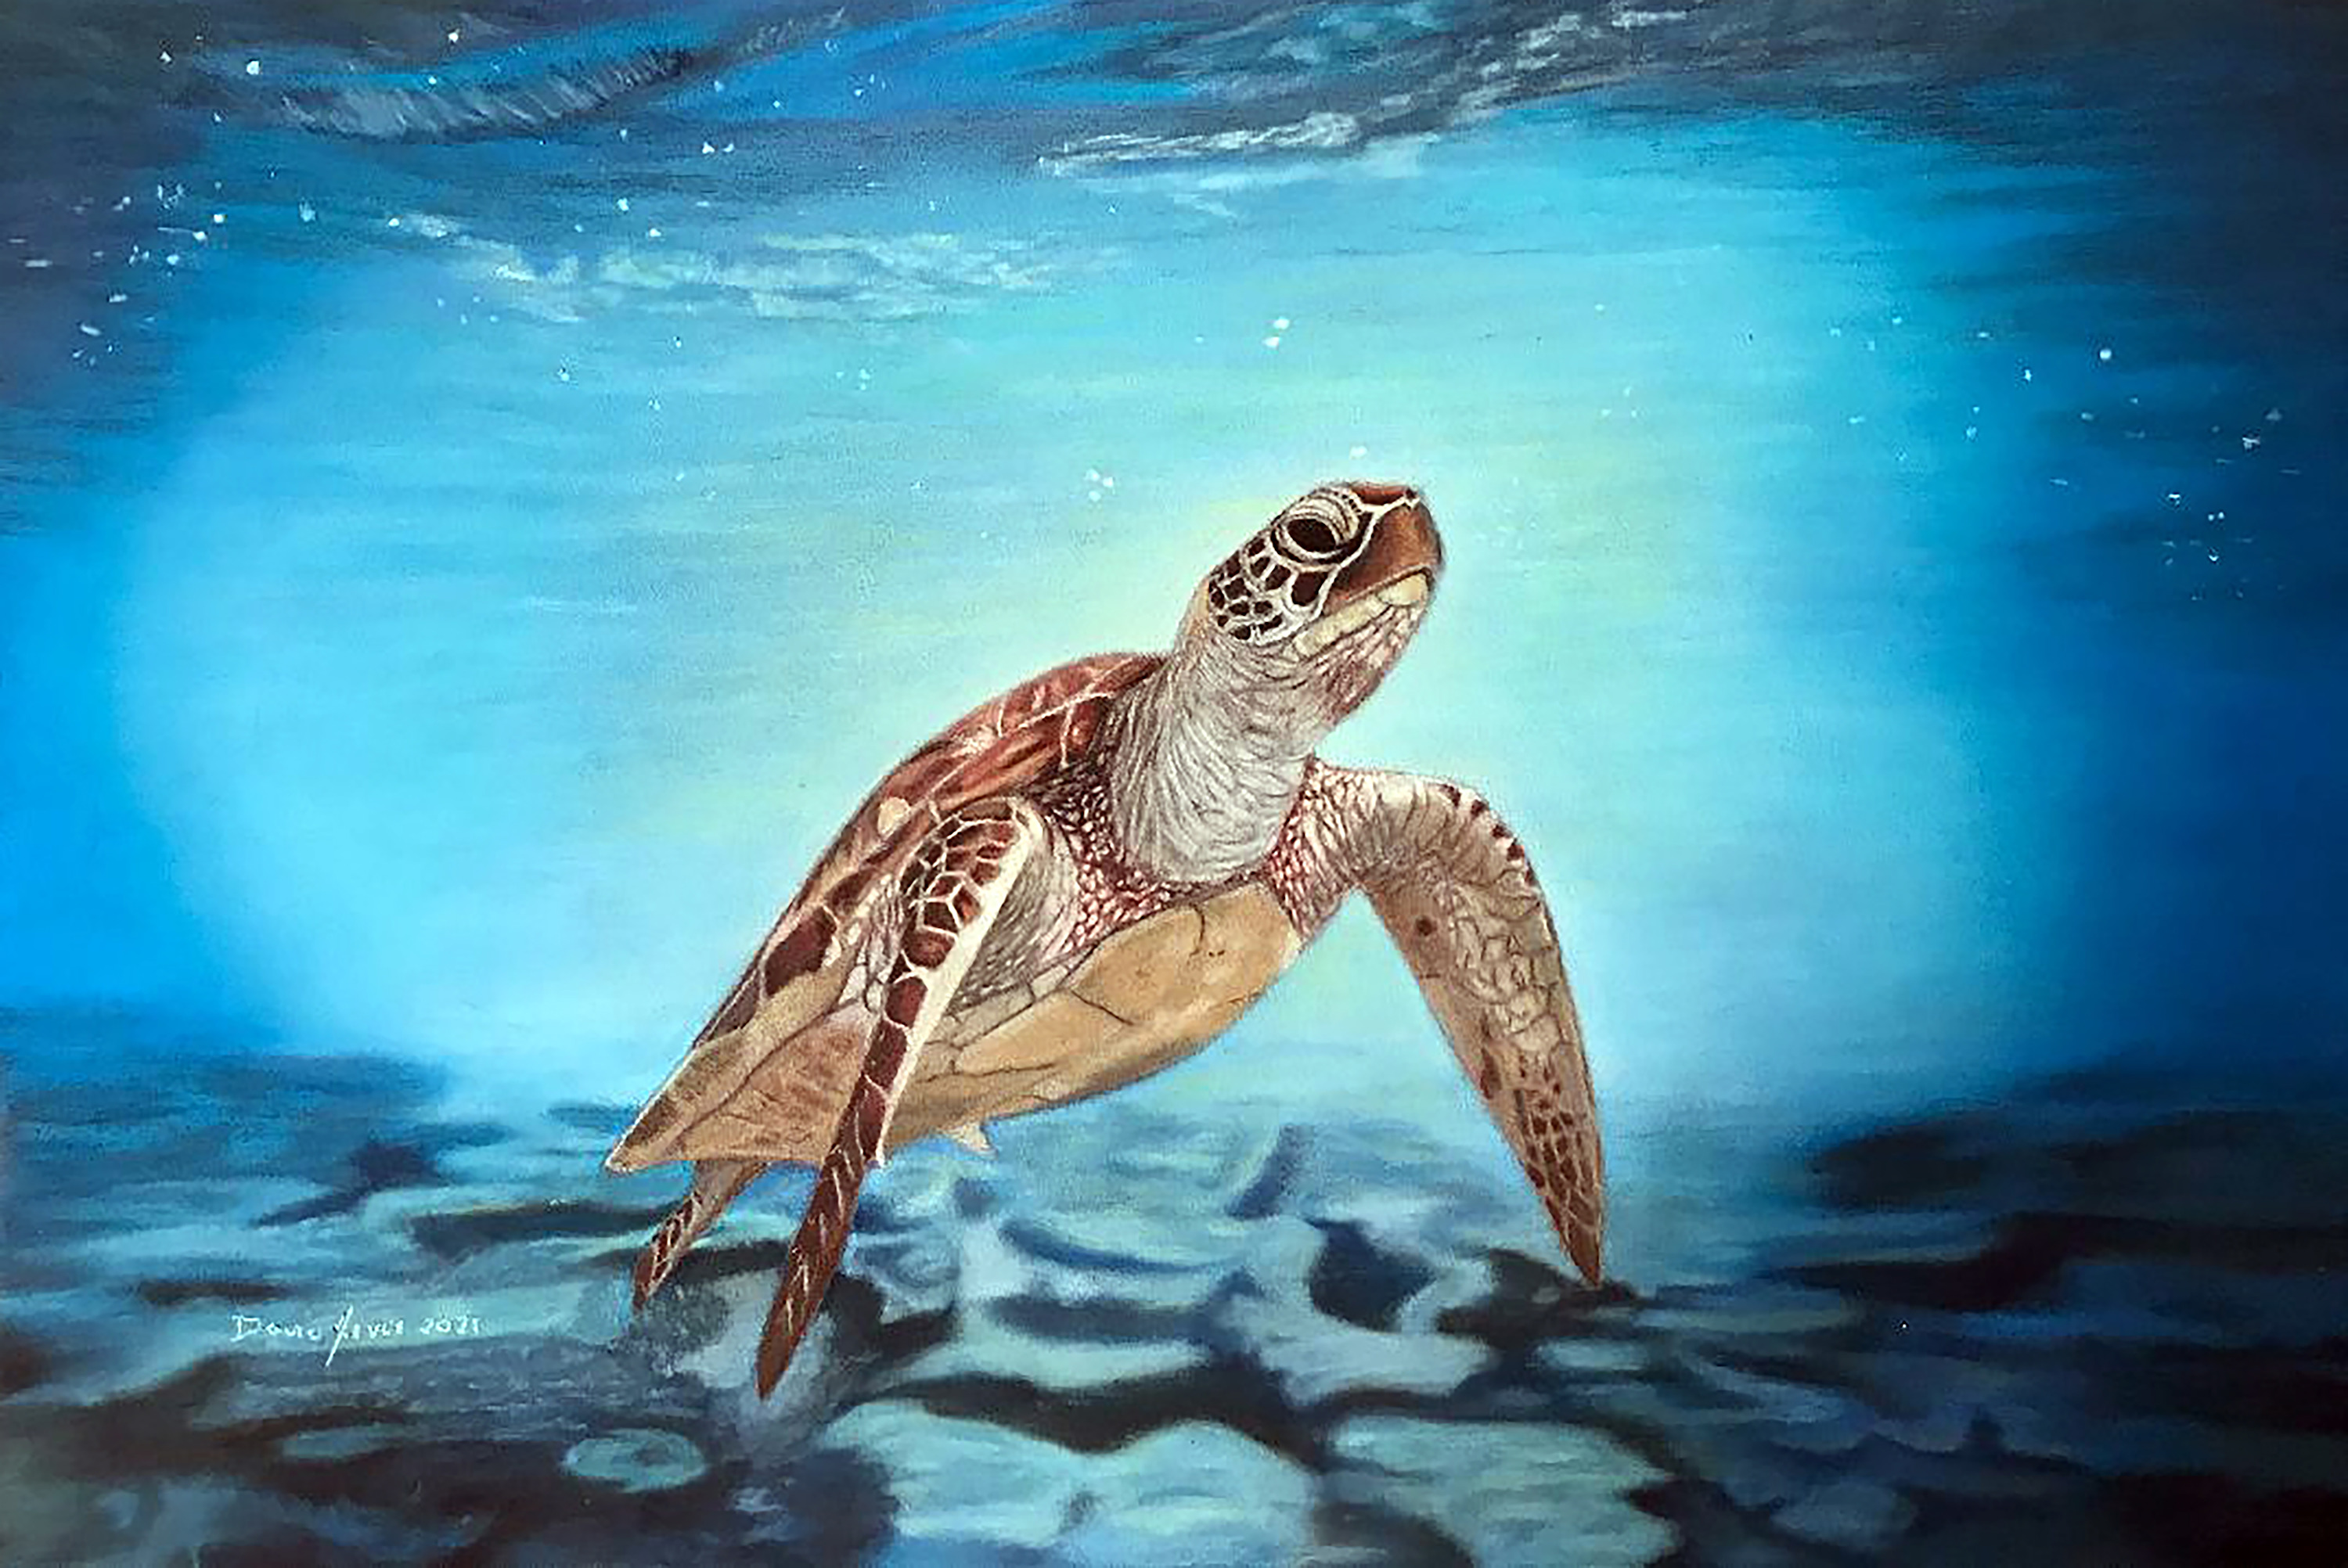 Dave nevue   drifting sea turtle   special edition 8 x 10 matted print   60 vb4kpm